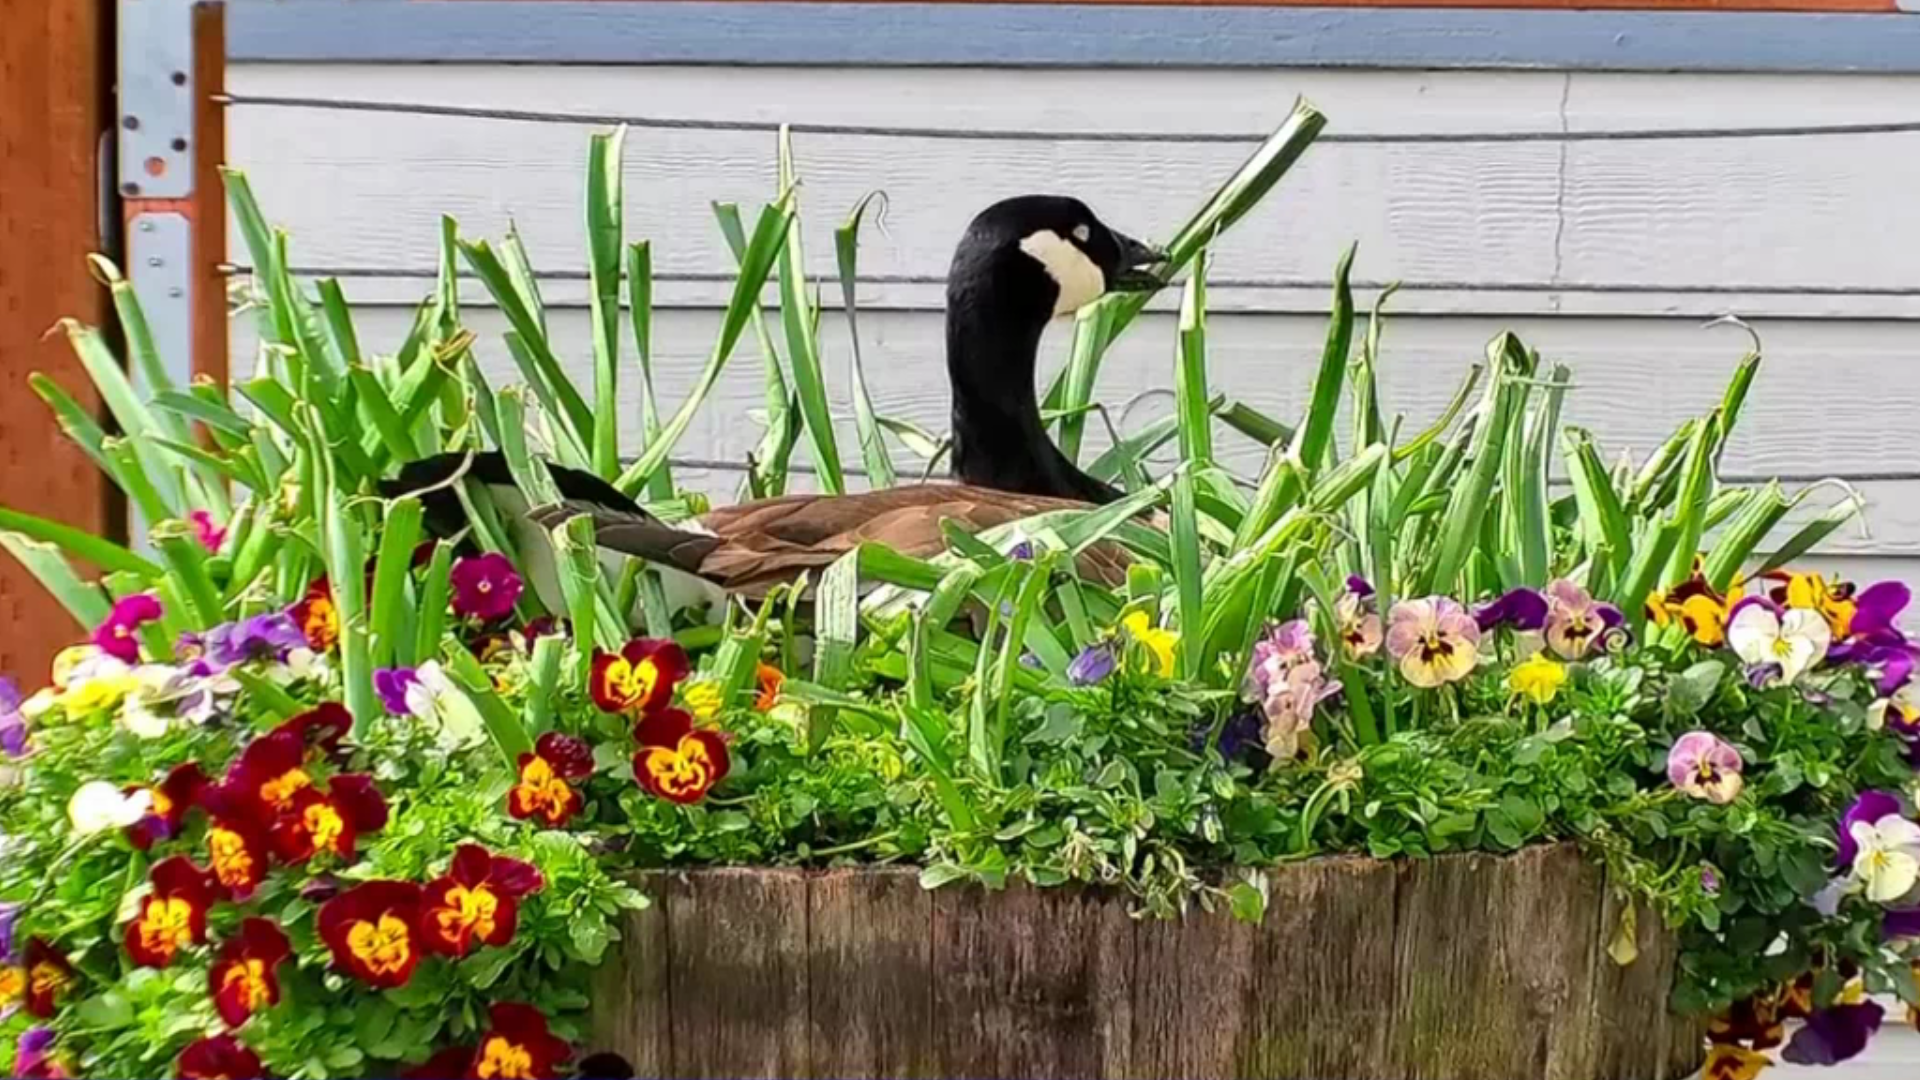 Stella the Goose is a Tides Tavern regular -- she raises a family in one of their planters every year! #k5evening